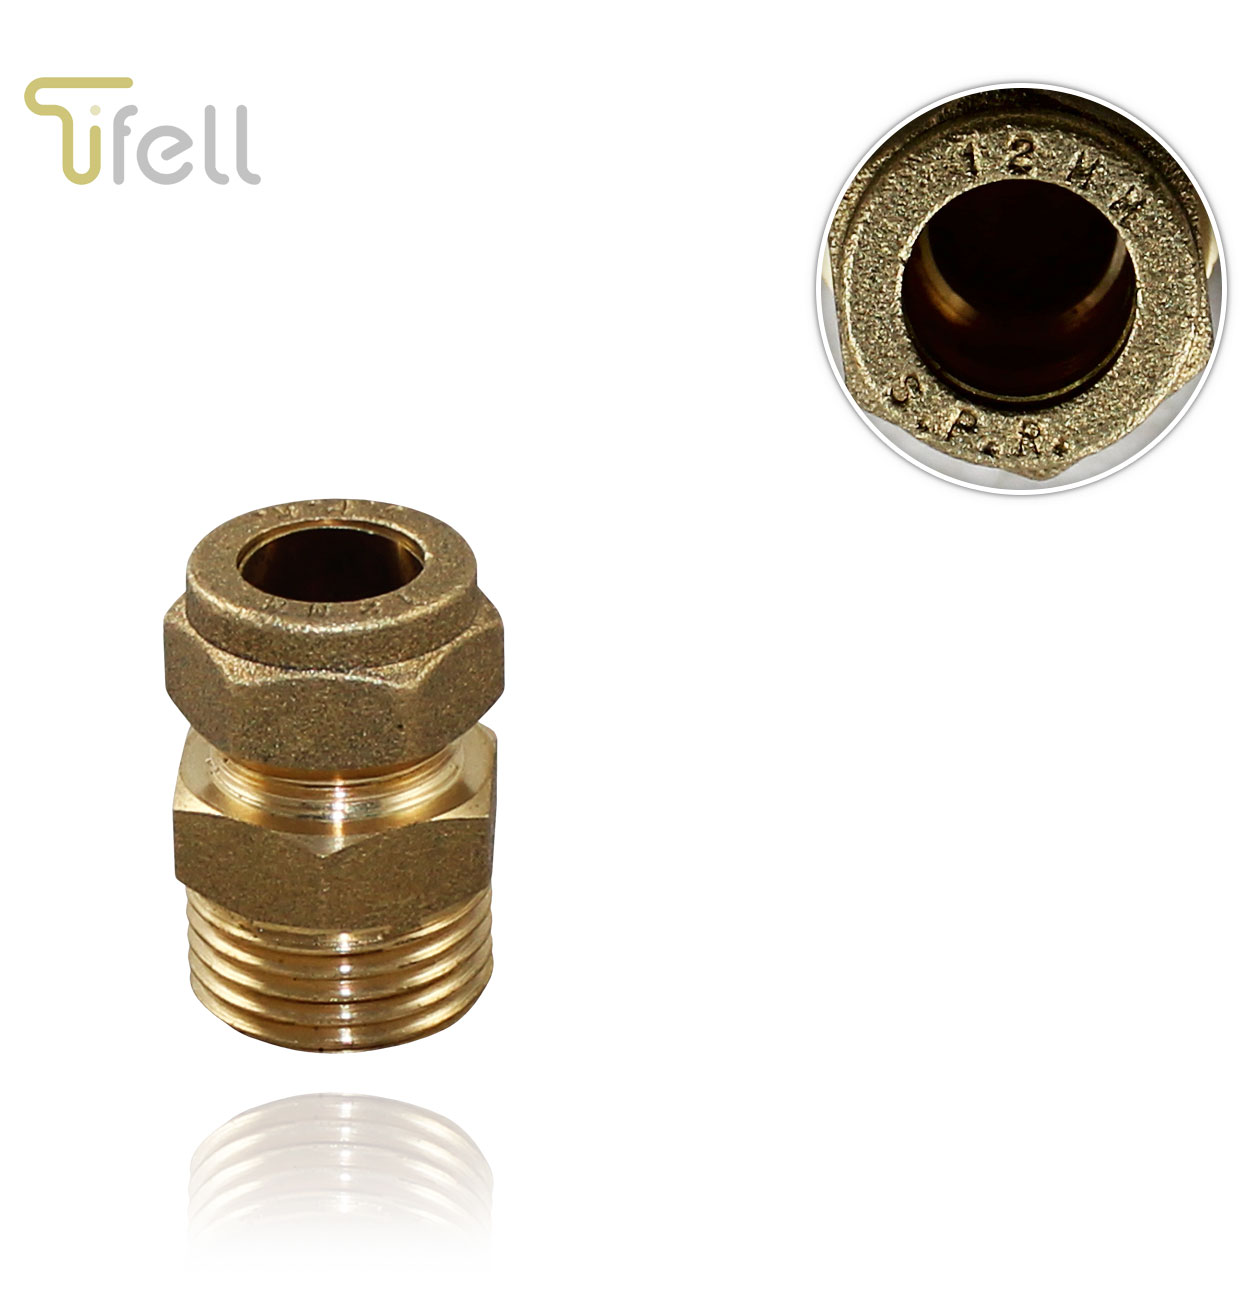 1/2M-12 TIFELL SECUFELL STRAIGHT COMPRESSION CONNECTOR